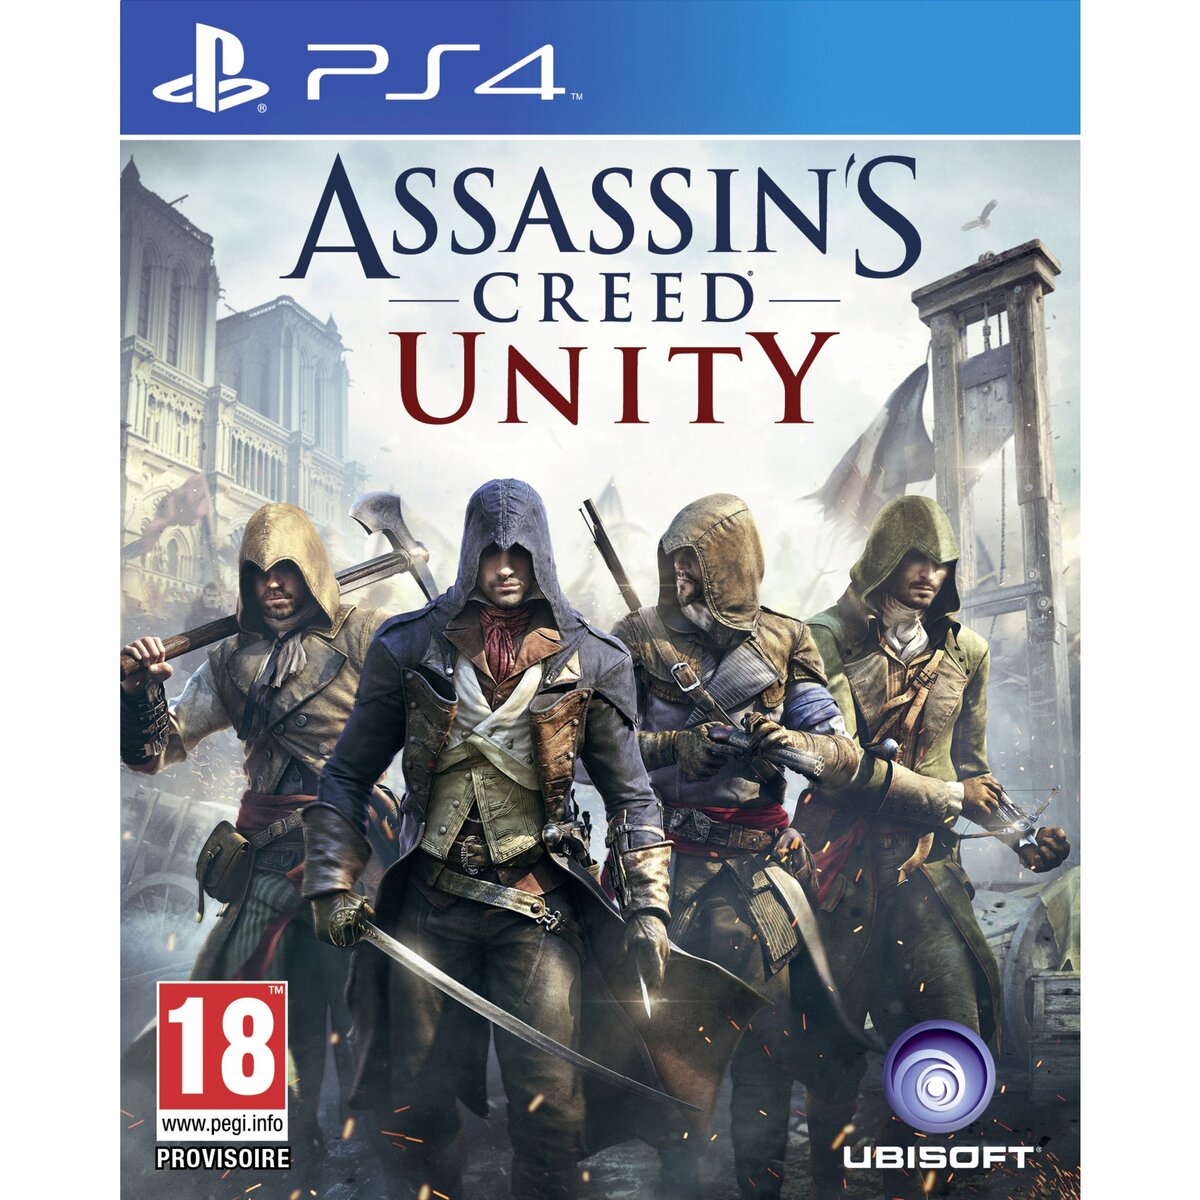 Assassin's Creed Unity - Edition Spéciale PS4